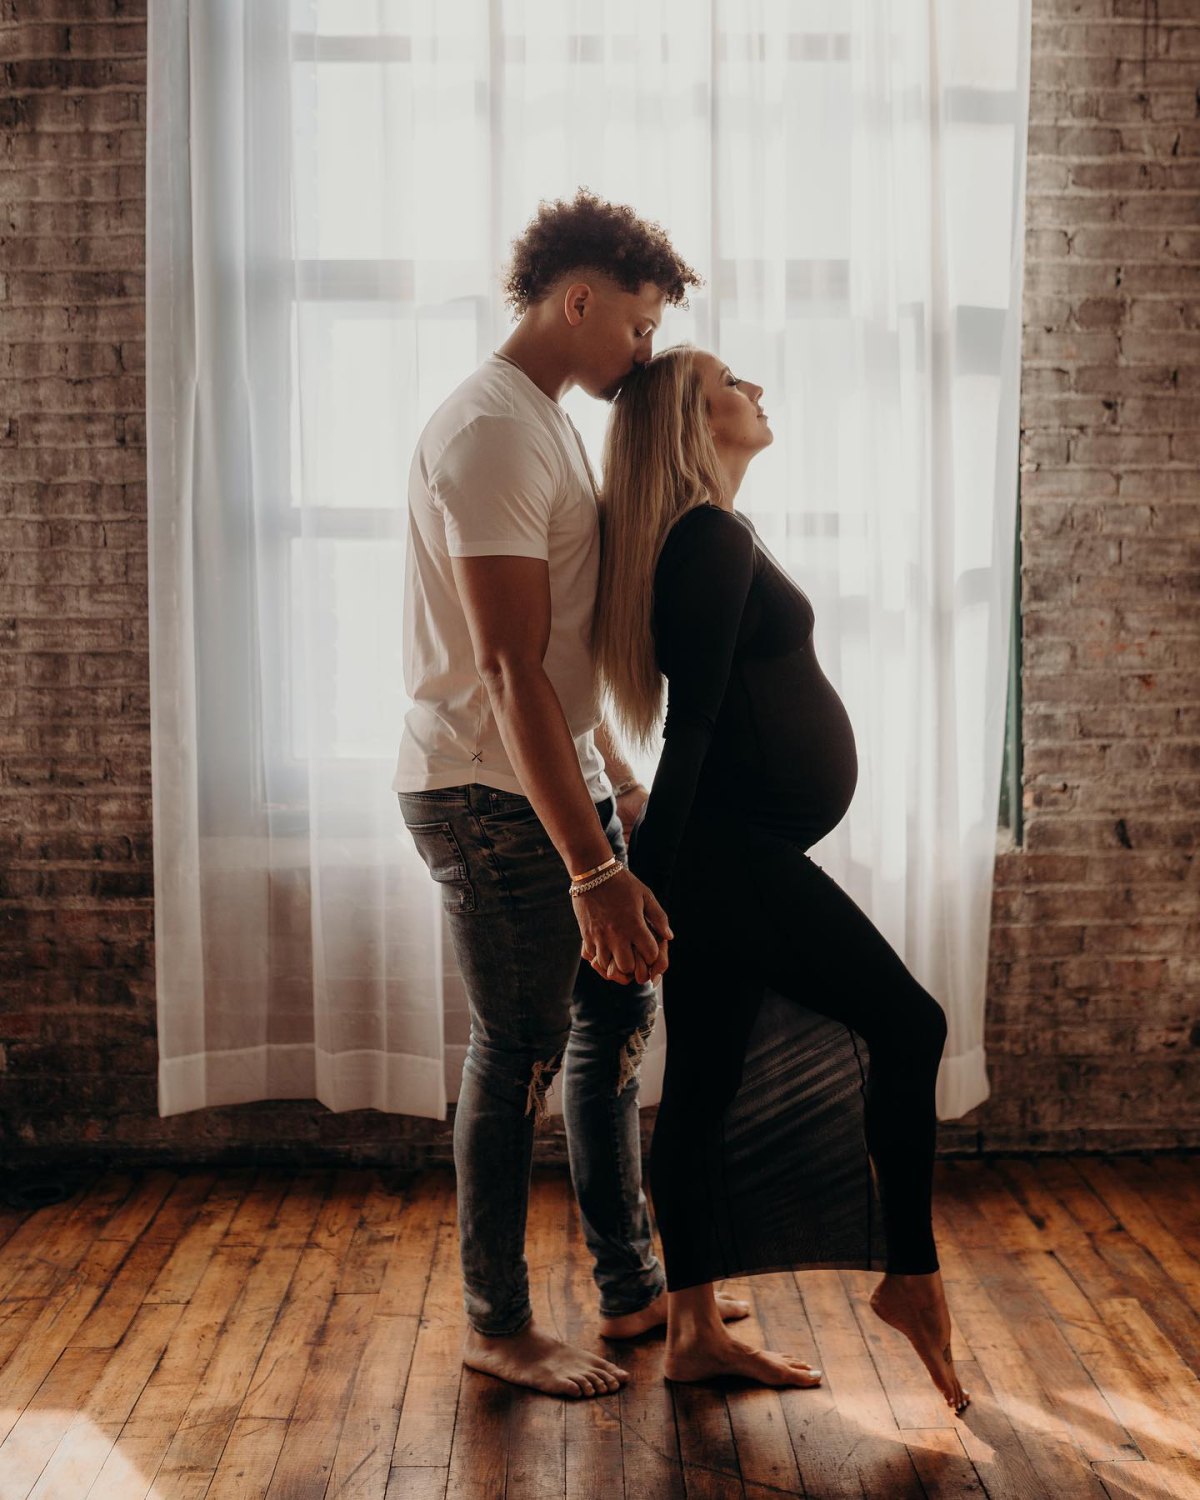 Brittany Matthews Embraced Body More This Pregnancy Photos Crumpe